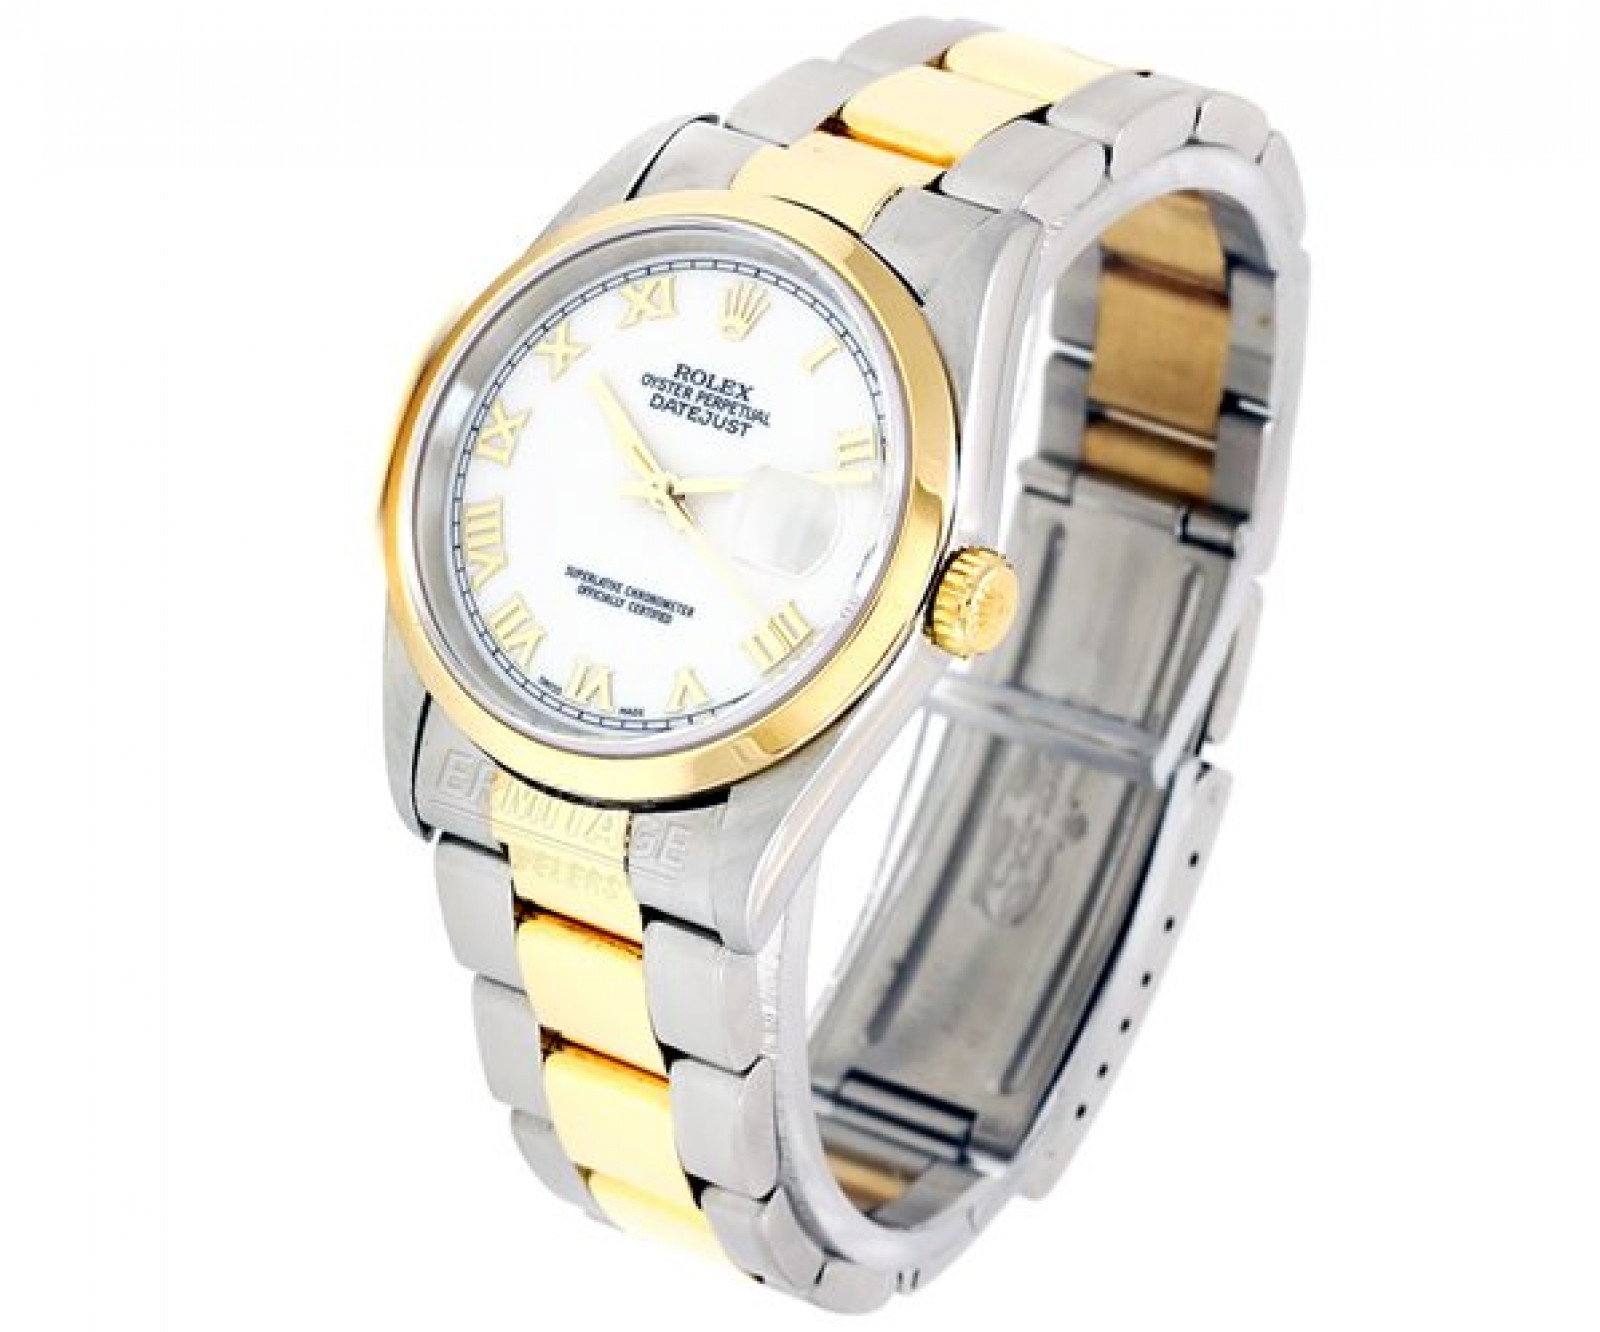 Rolex Datejust 16203 Gold & Steel with White Dial